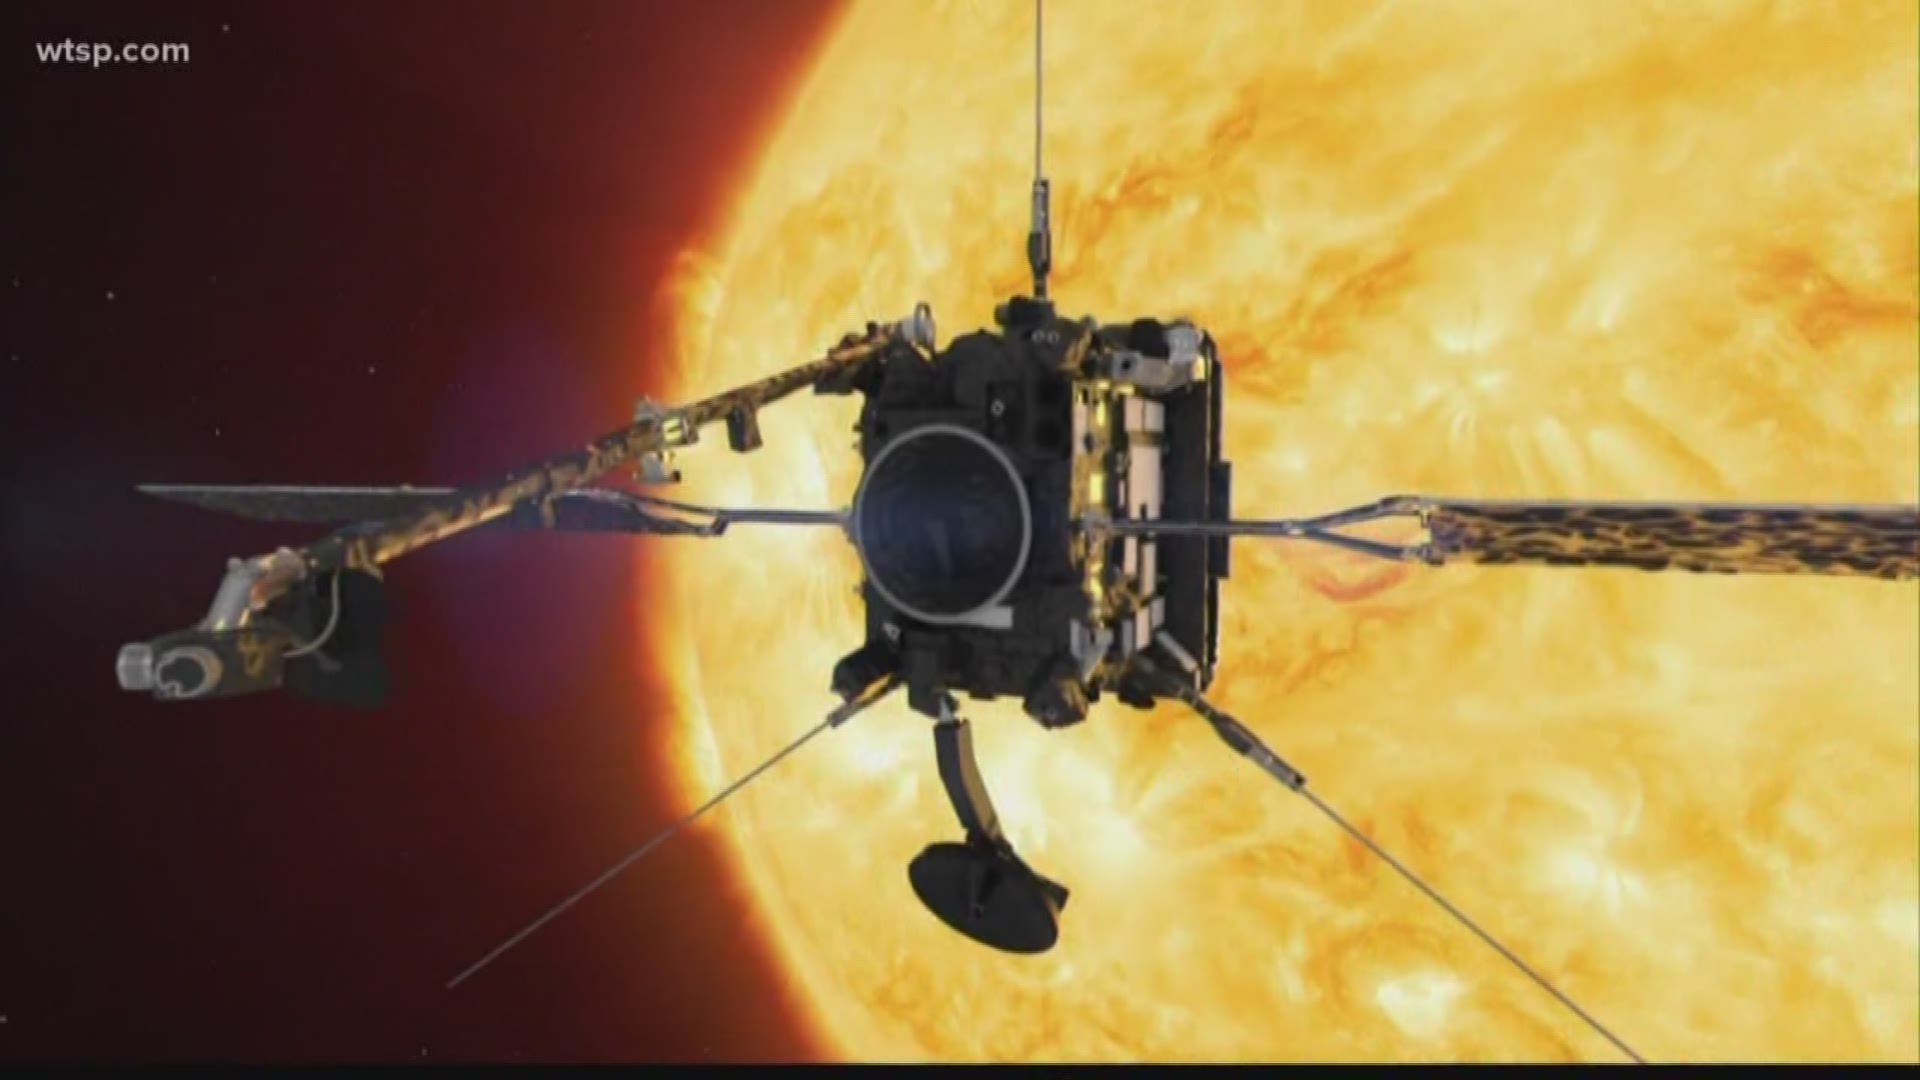 Following years of development and eventual delays, all systems appear to be a "go" for the Solar Orbiter satellite to capture never before seen views of the sun.